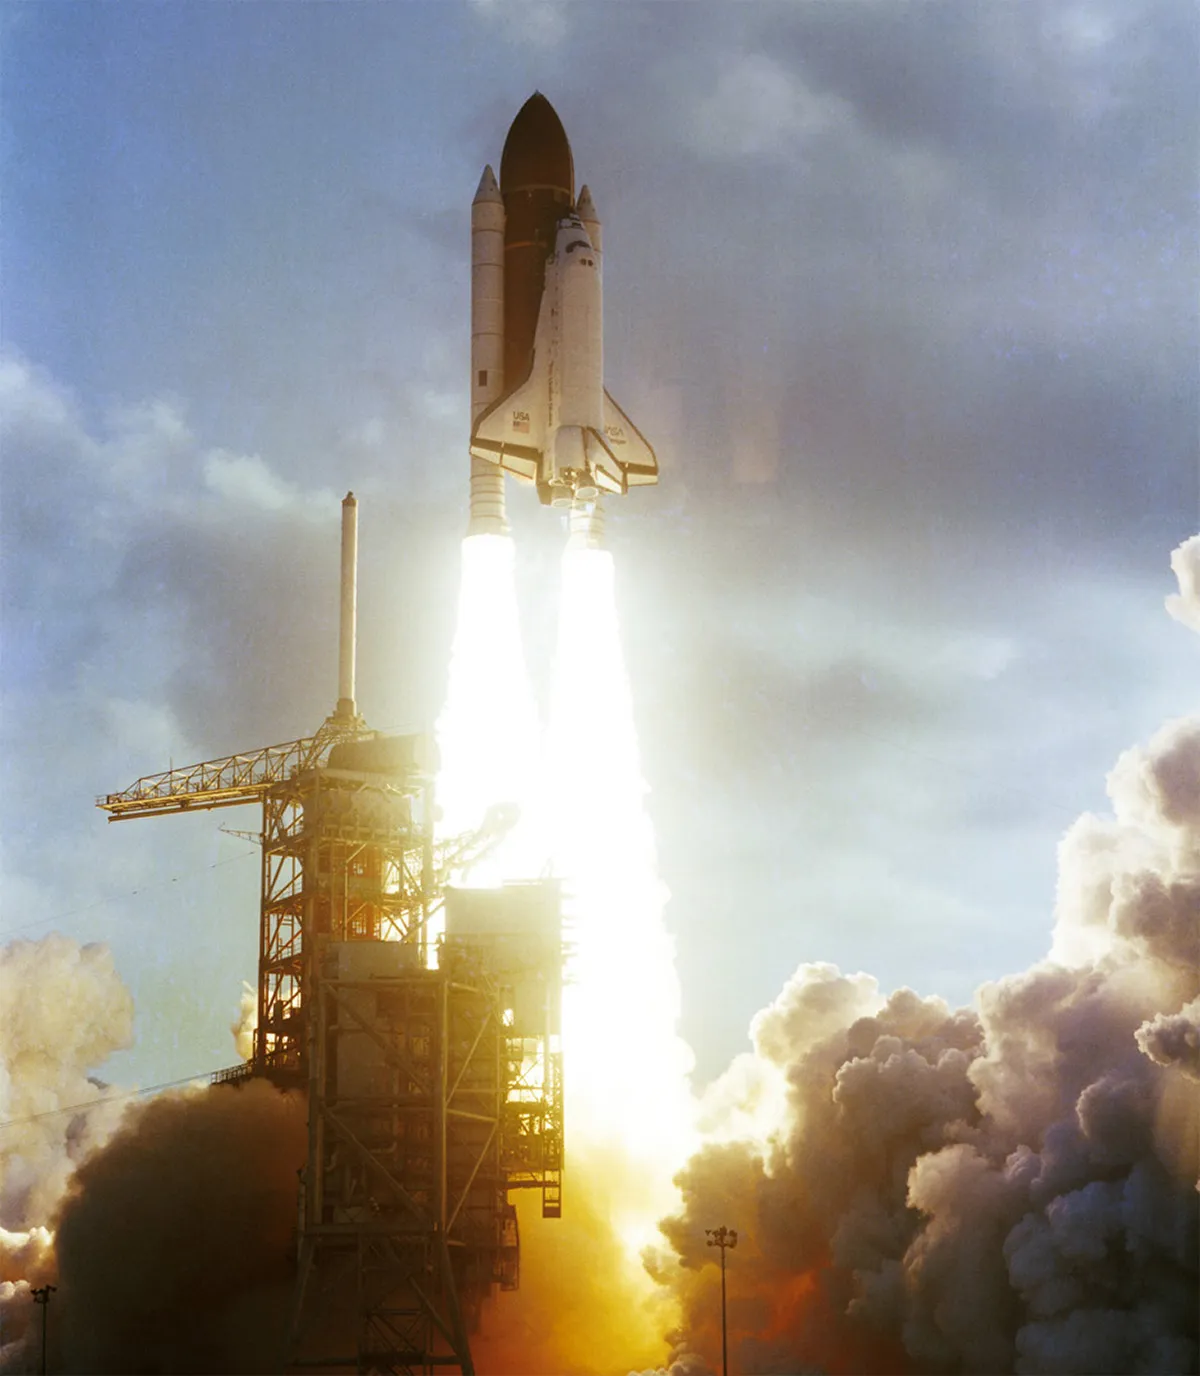 Liftoff of STS-7, the flight that made Sally Ride the first American woman in space. Credit: NASA